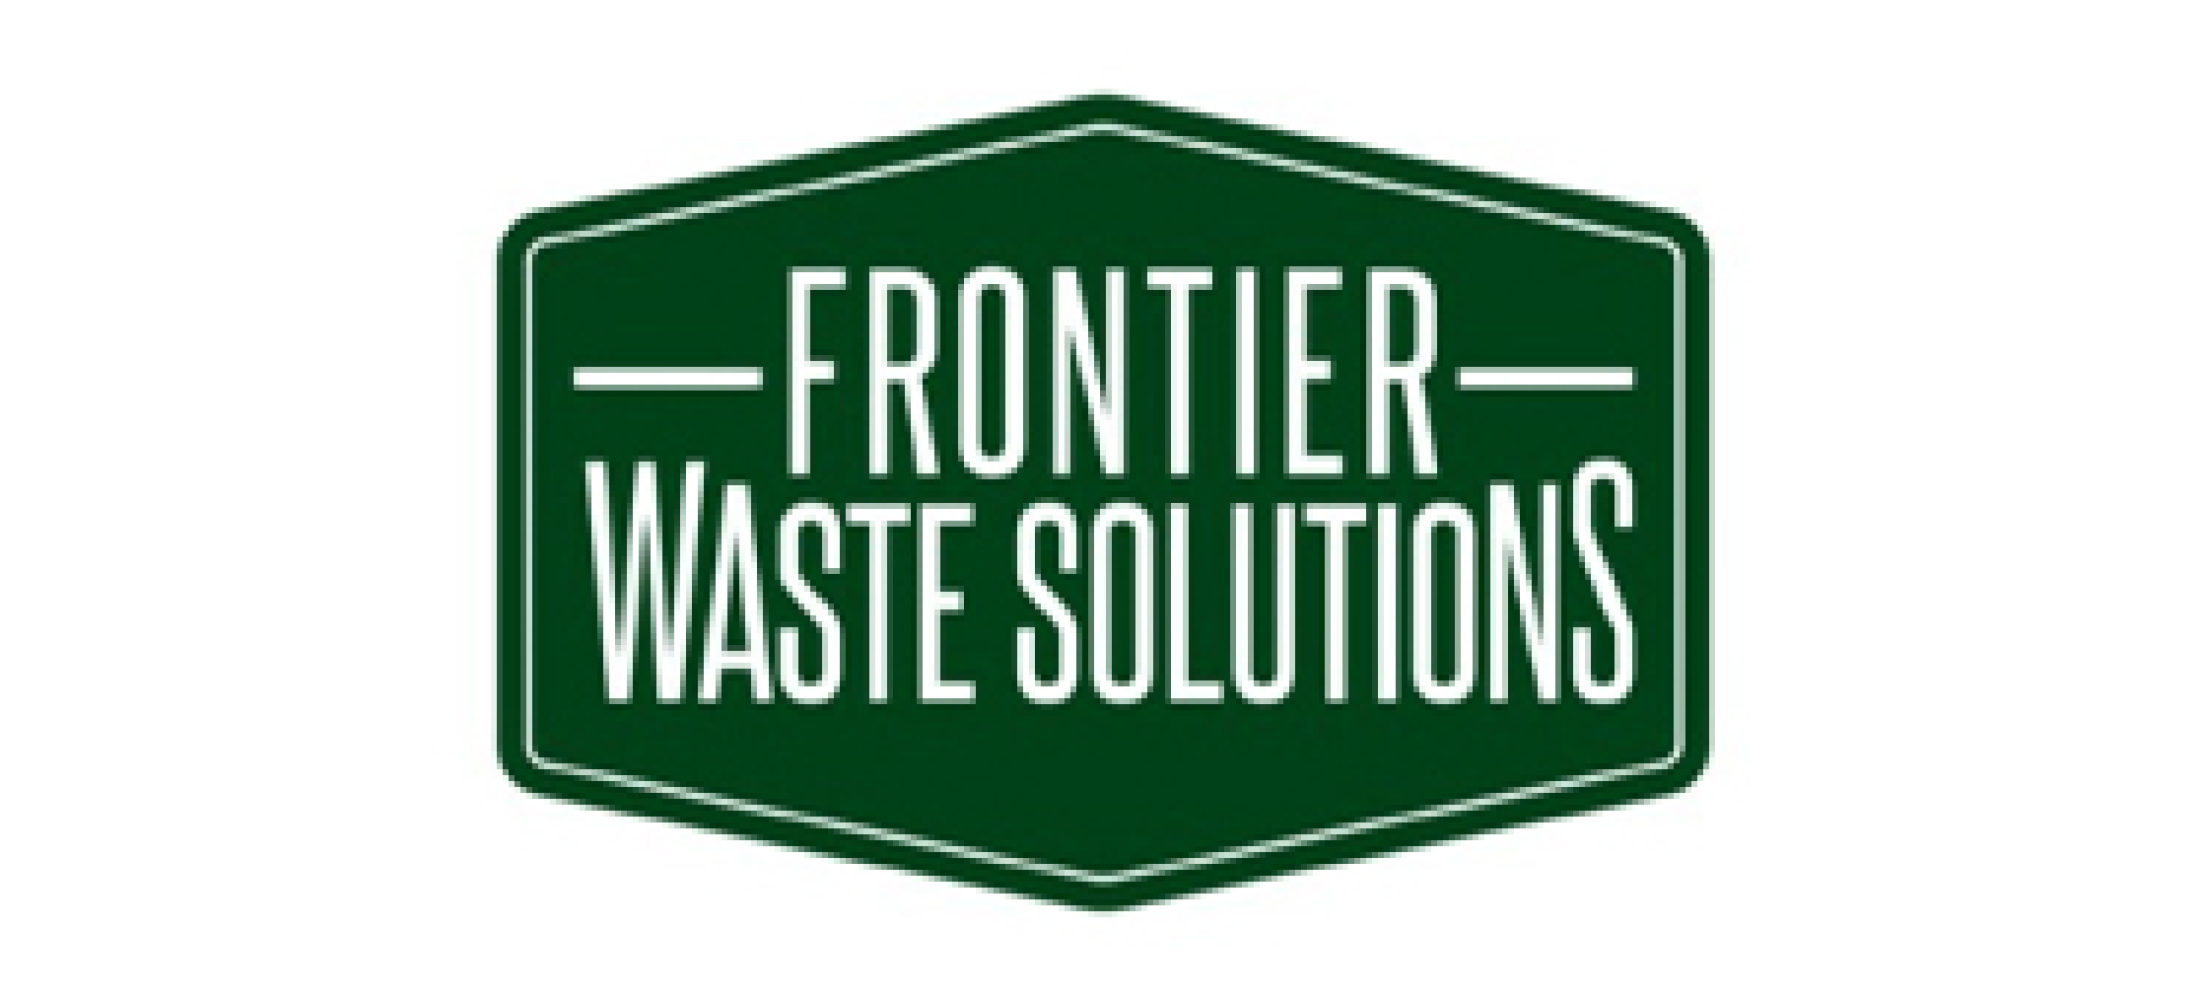 Frontier Waste Solutions Financial Investments Corporation